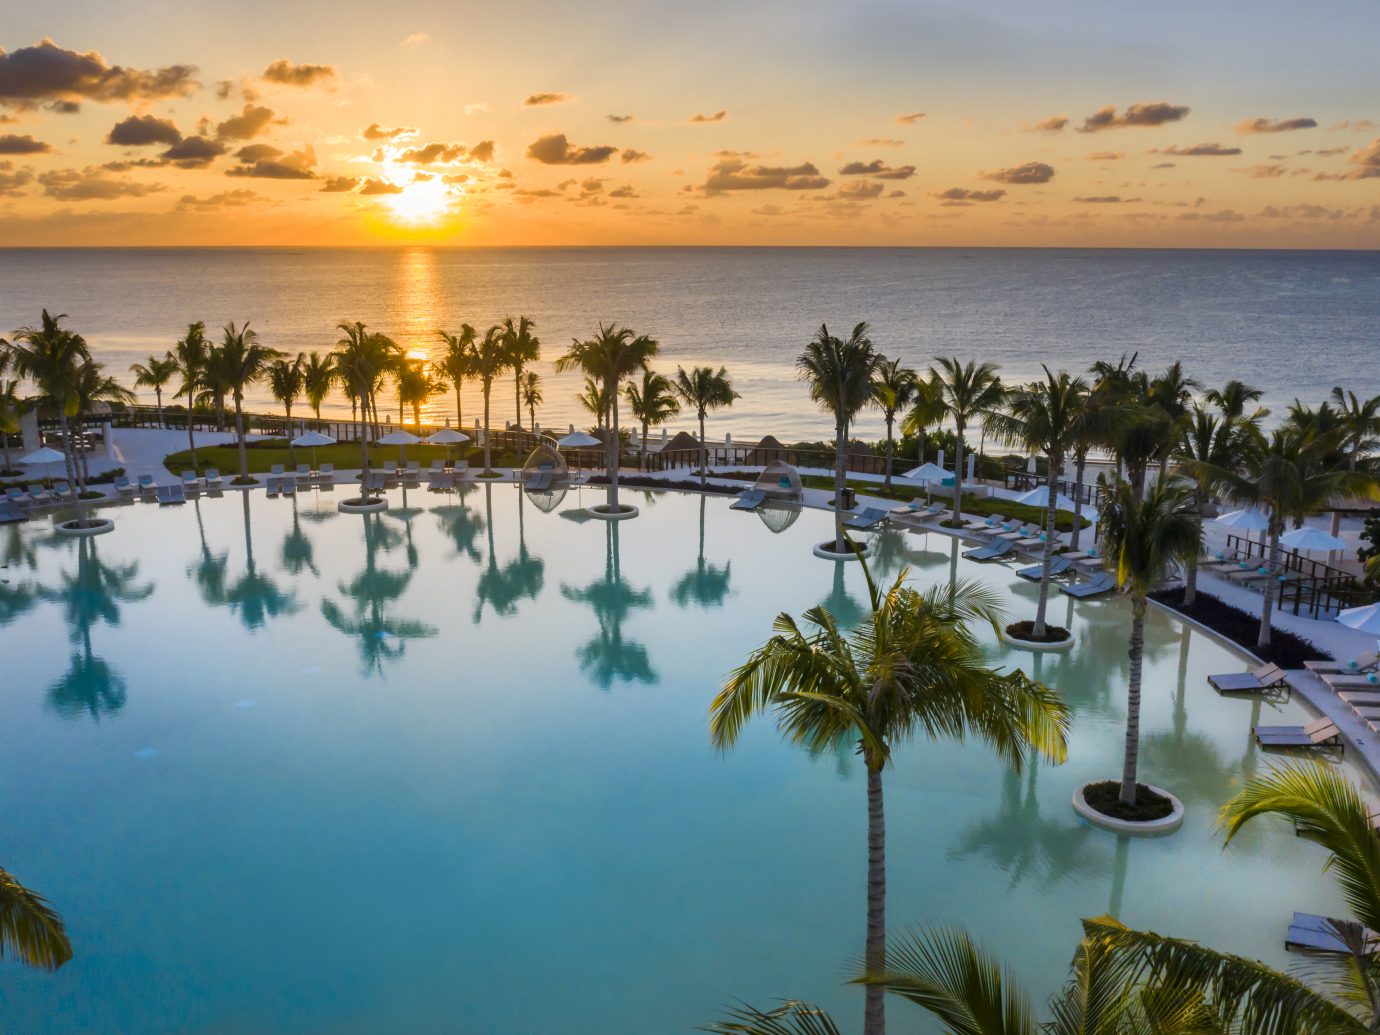 pool and ocean view at sunset at Haven Riviera Cancun, Mexico